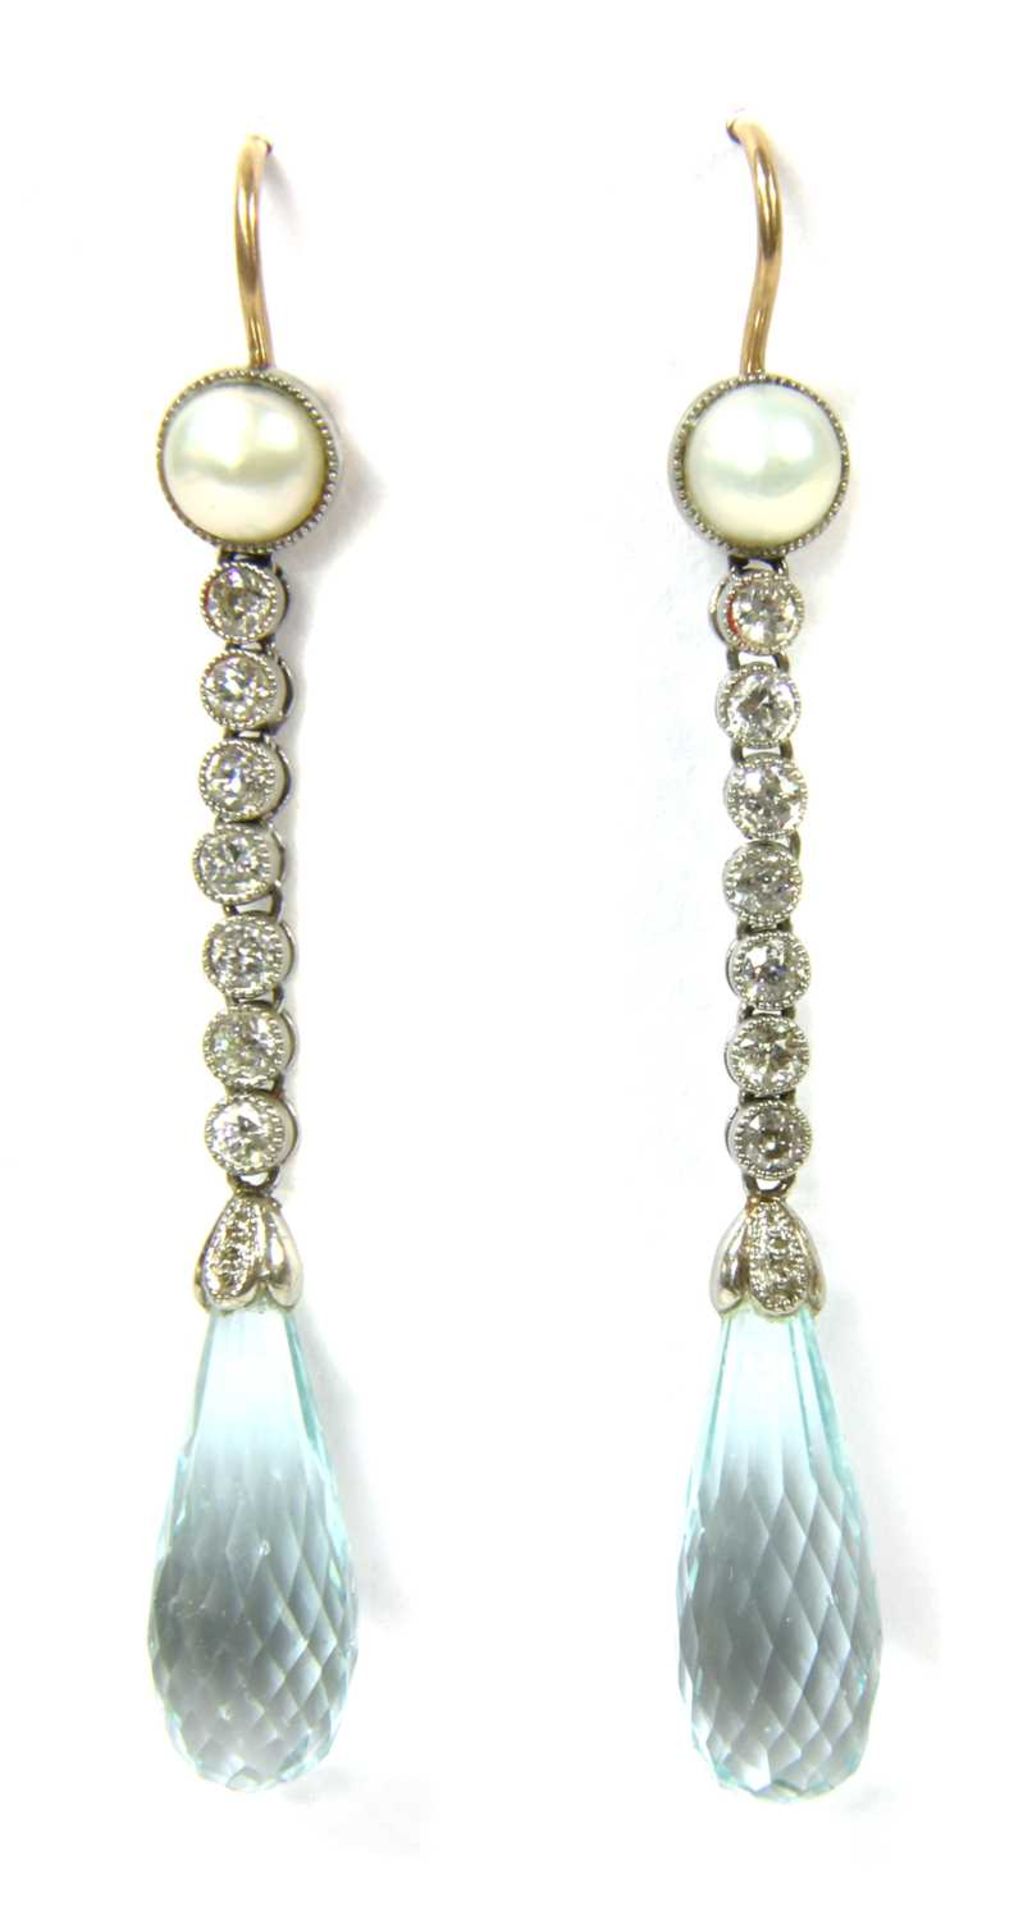 A pair of platinum and gold, aquamarine, diamond and pearl drop earrings